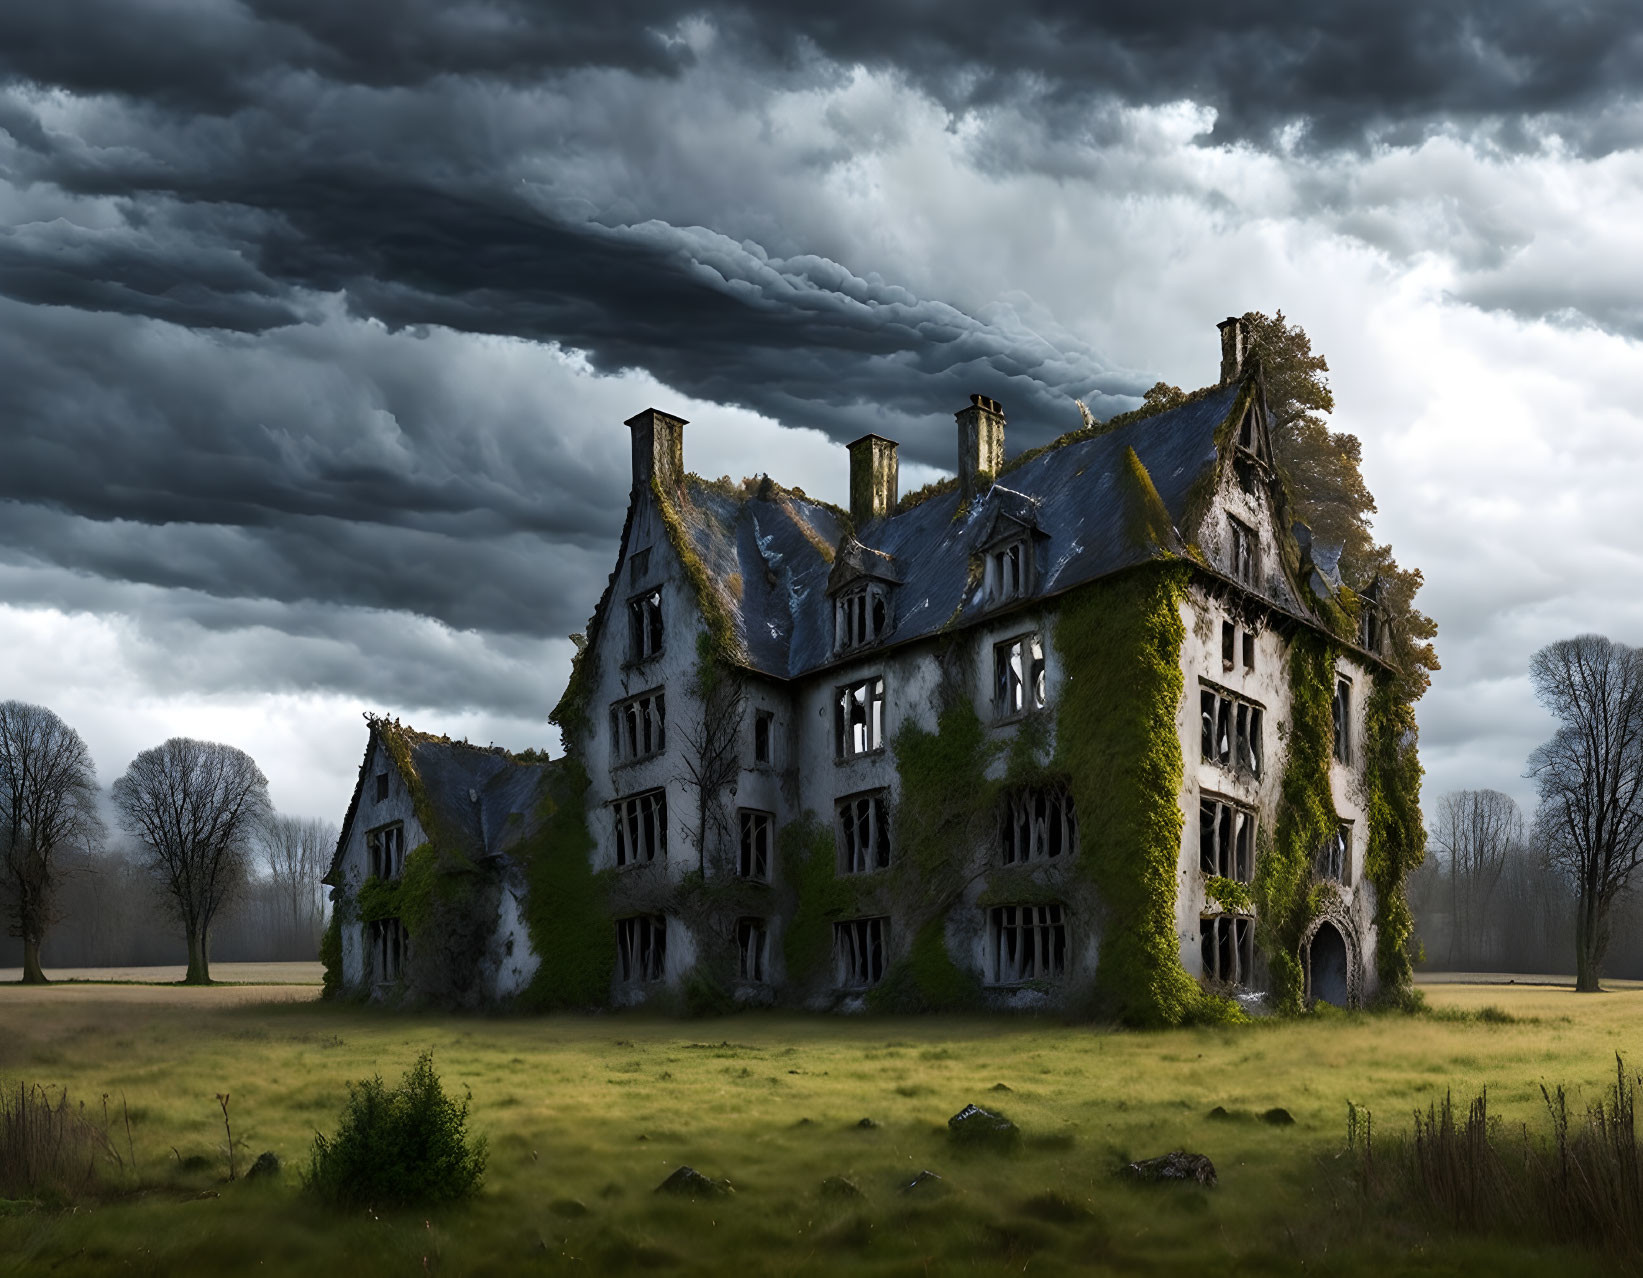 Ivy-covered mansion in desolate field under stormy sky